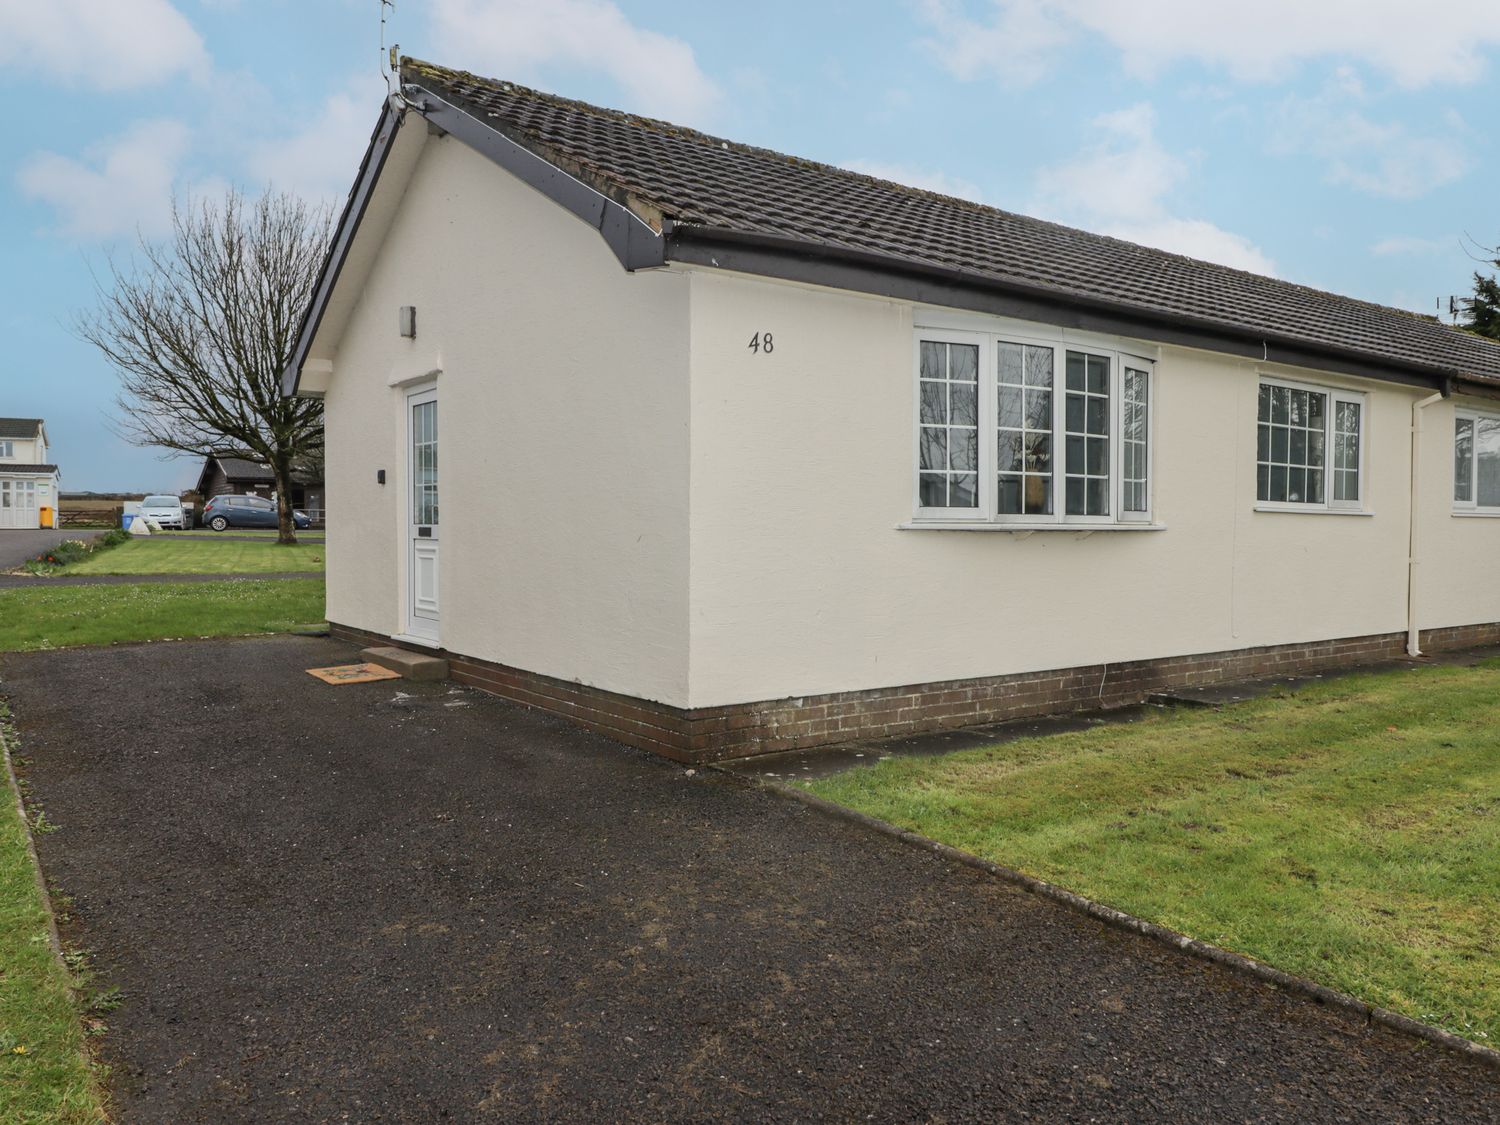 48 Gower Holiday Village - South Wales - 1151371 - photo 1